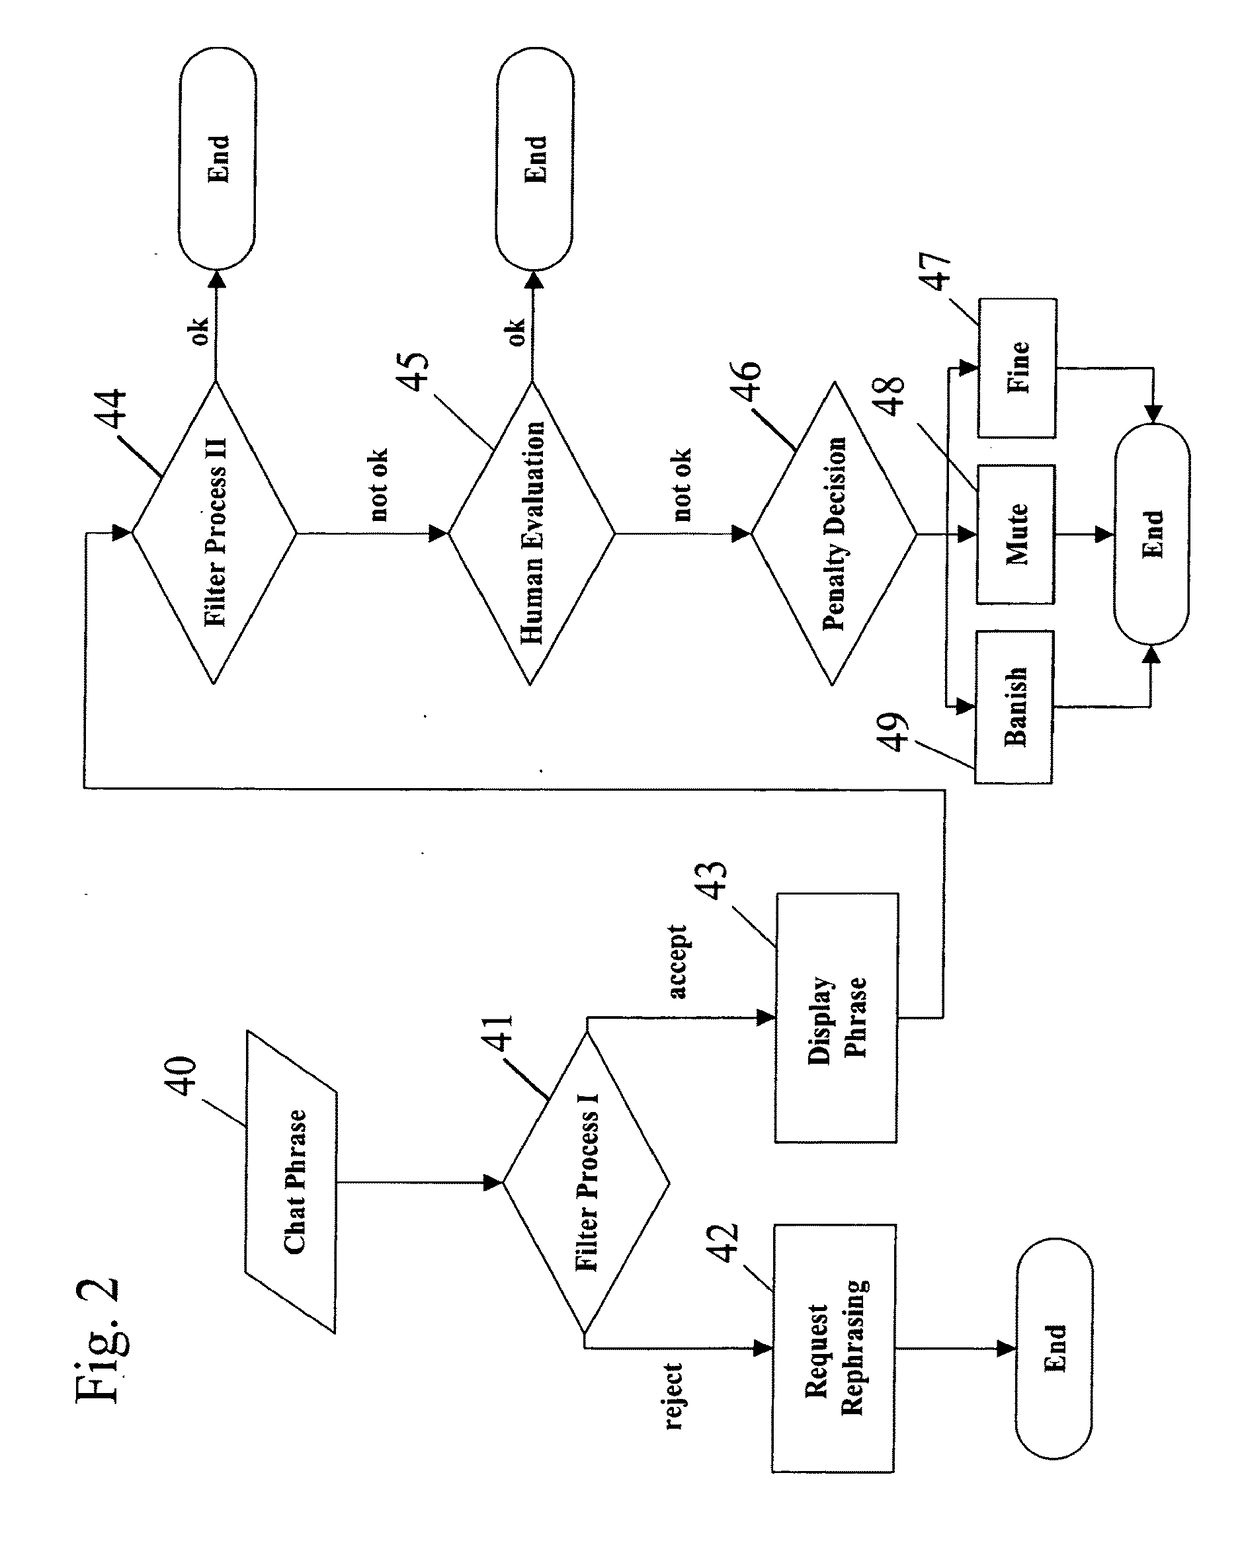 Multi-Tiered Safety Control System and Methods for Online Communities